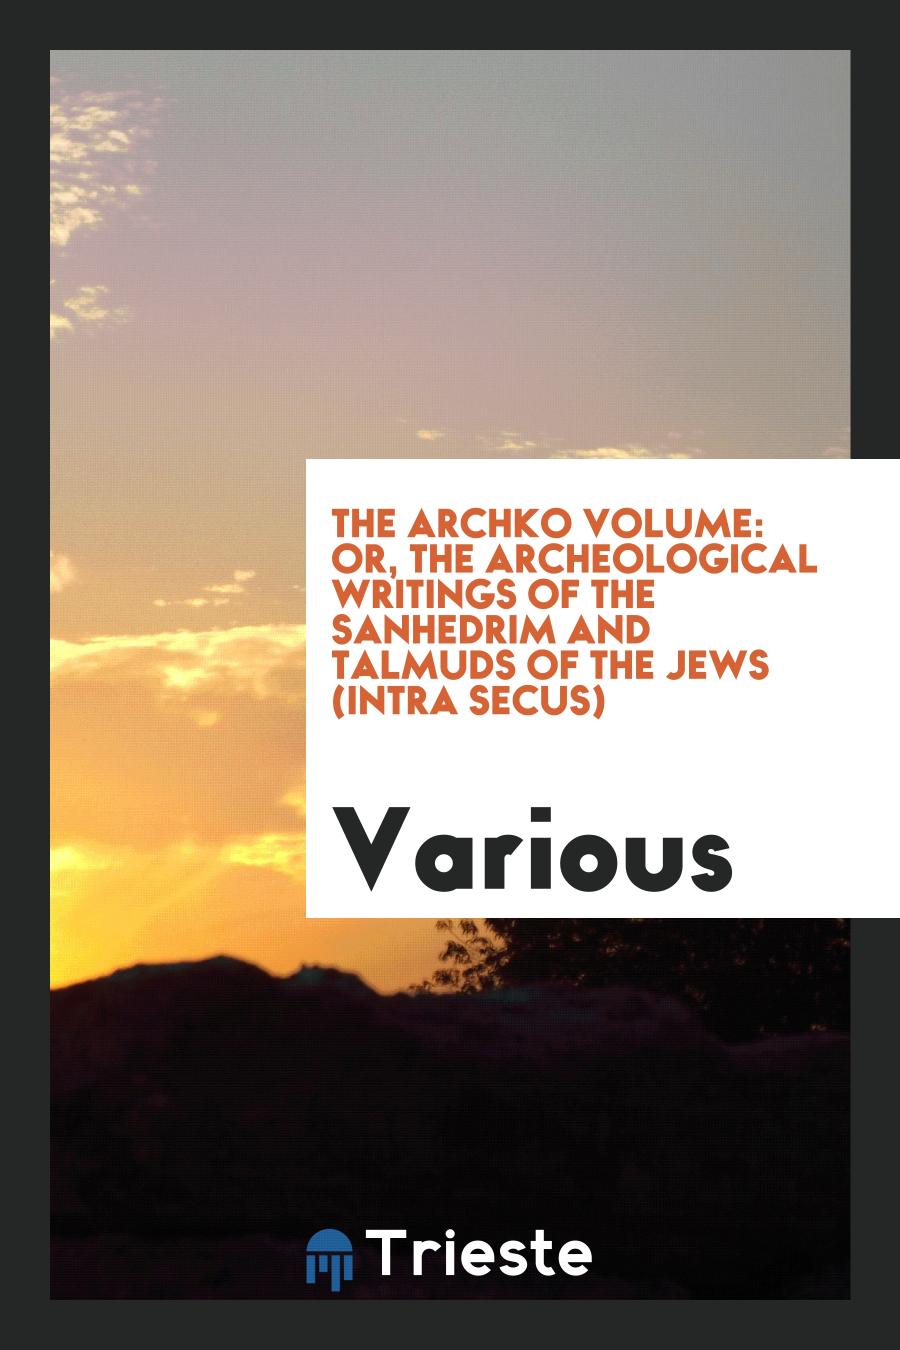 The archko volume: or, The archeological writings of the Sanhedrim and Talmuds of the Jews (intra secus)